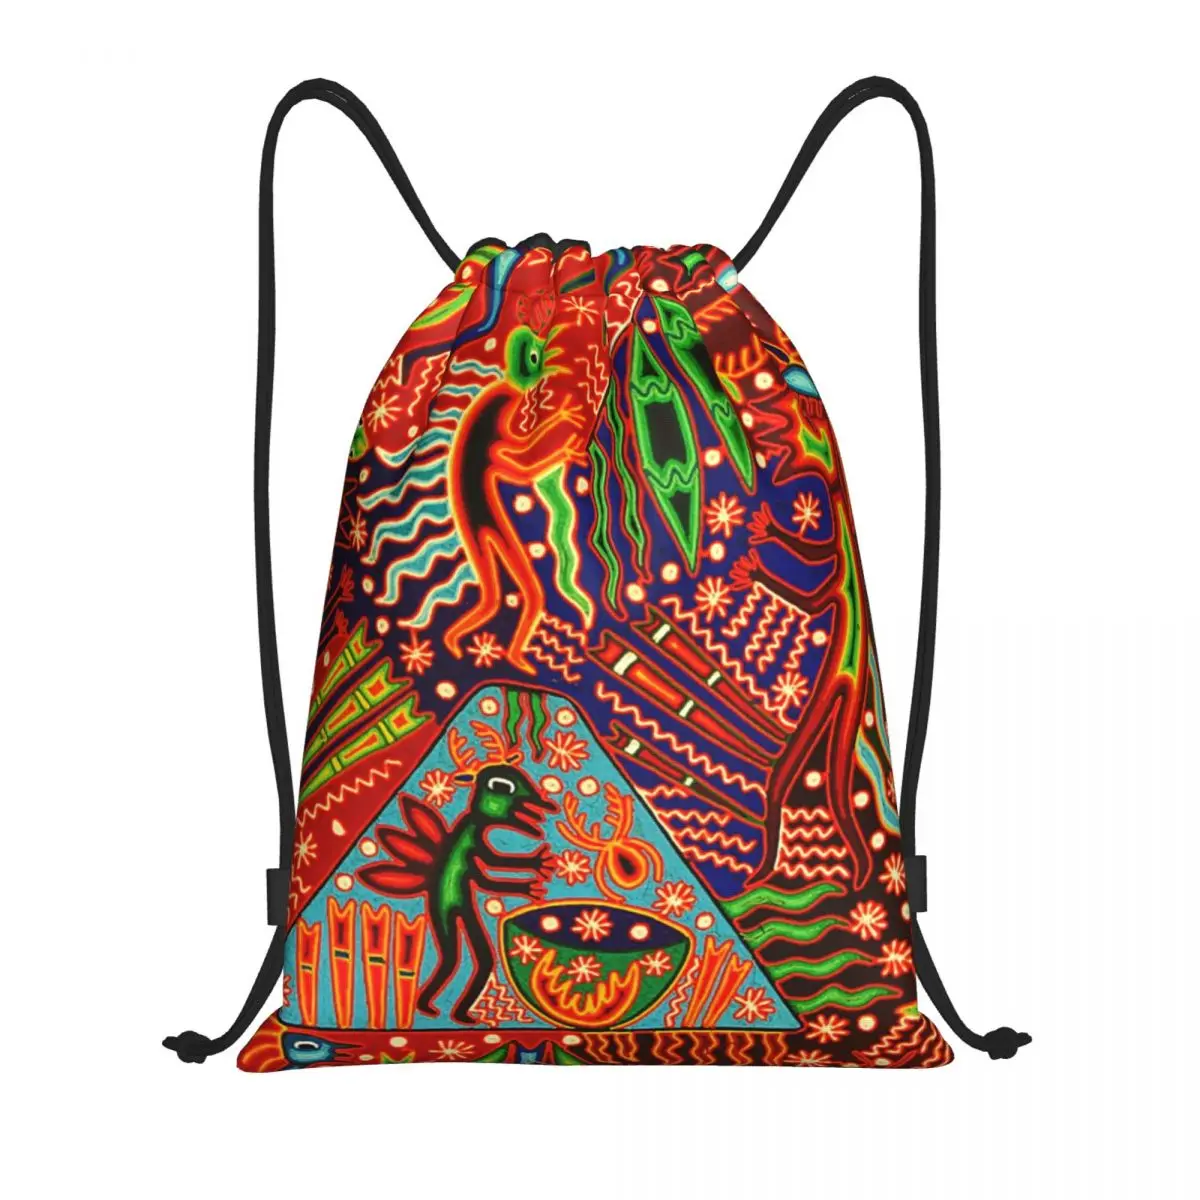 Custom Mexican Colorful Huichol Drawstring Backpack Bags Men Women Lightweight Gym Sports Sackpack Sacks for Shopping